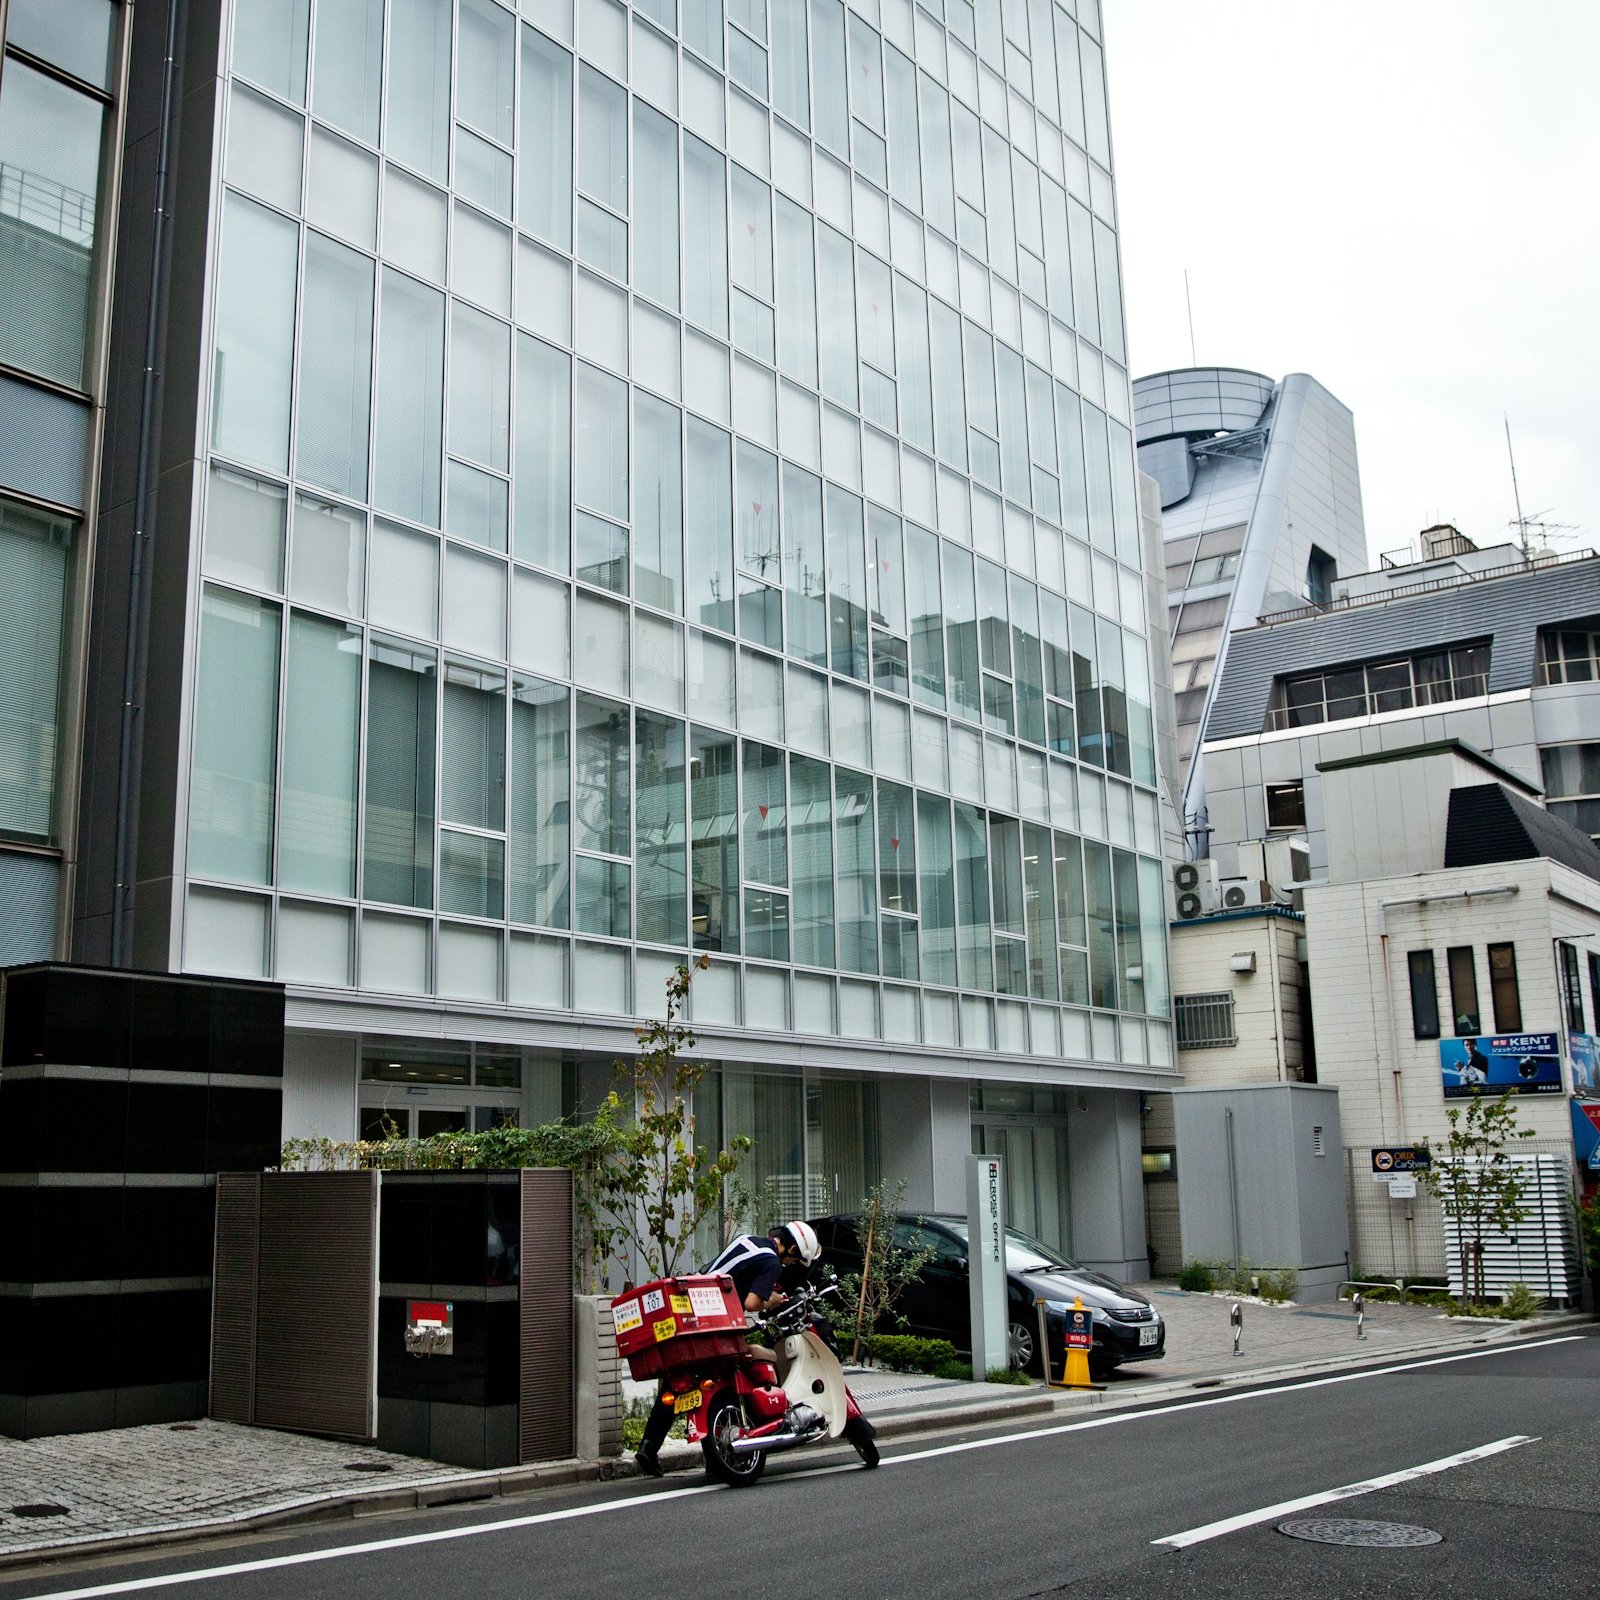 Mt Gox Creditors Petition the Court to Get Full Distribution of Bitcoins